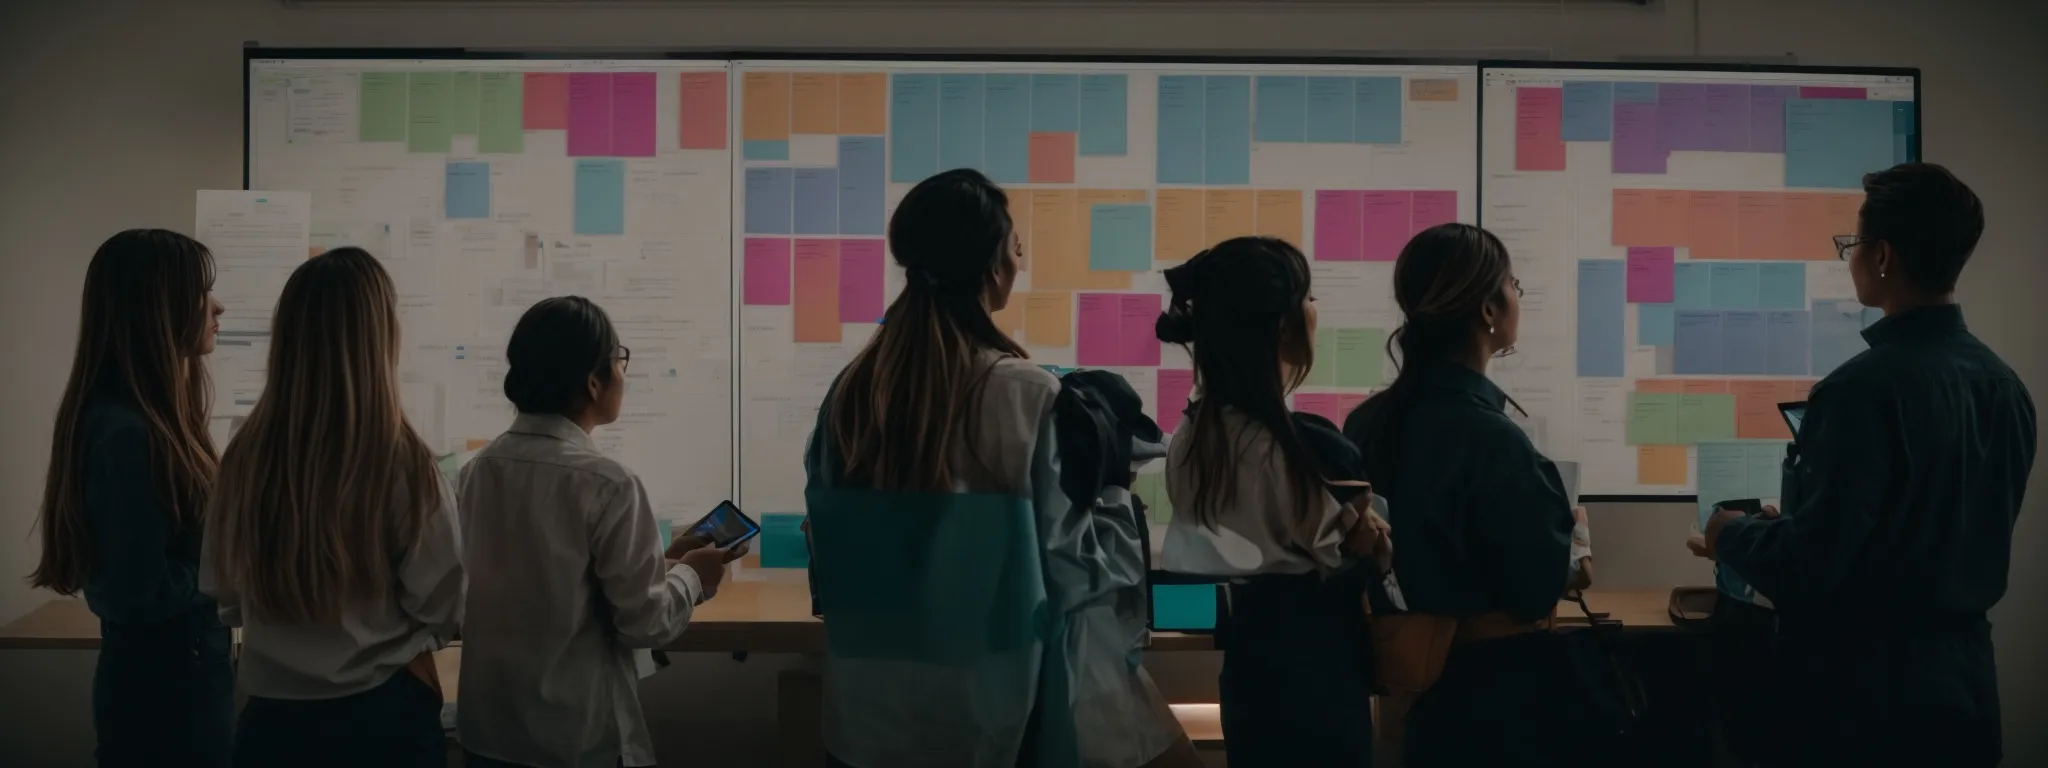 a team gathers around a large screen displaying colorful project timelines and task lists as they plan their digital marketing strategy.